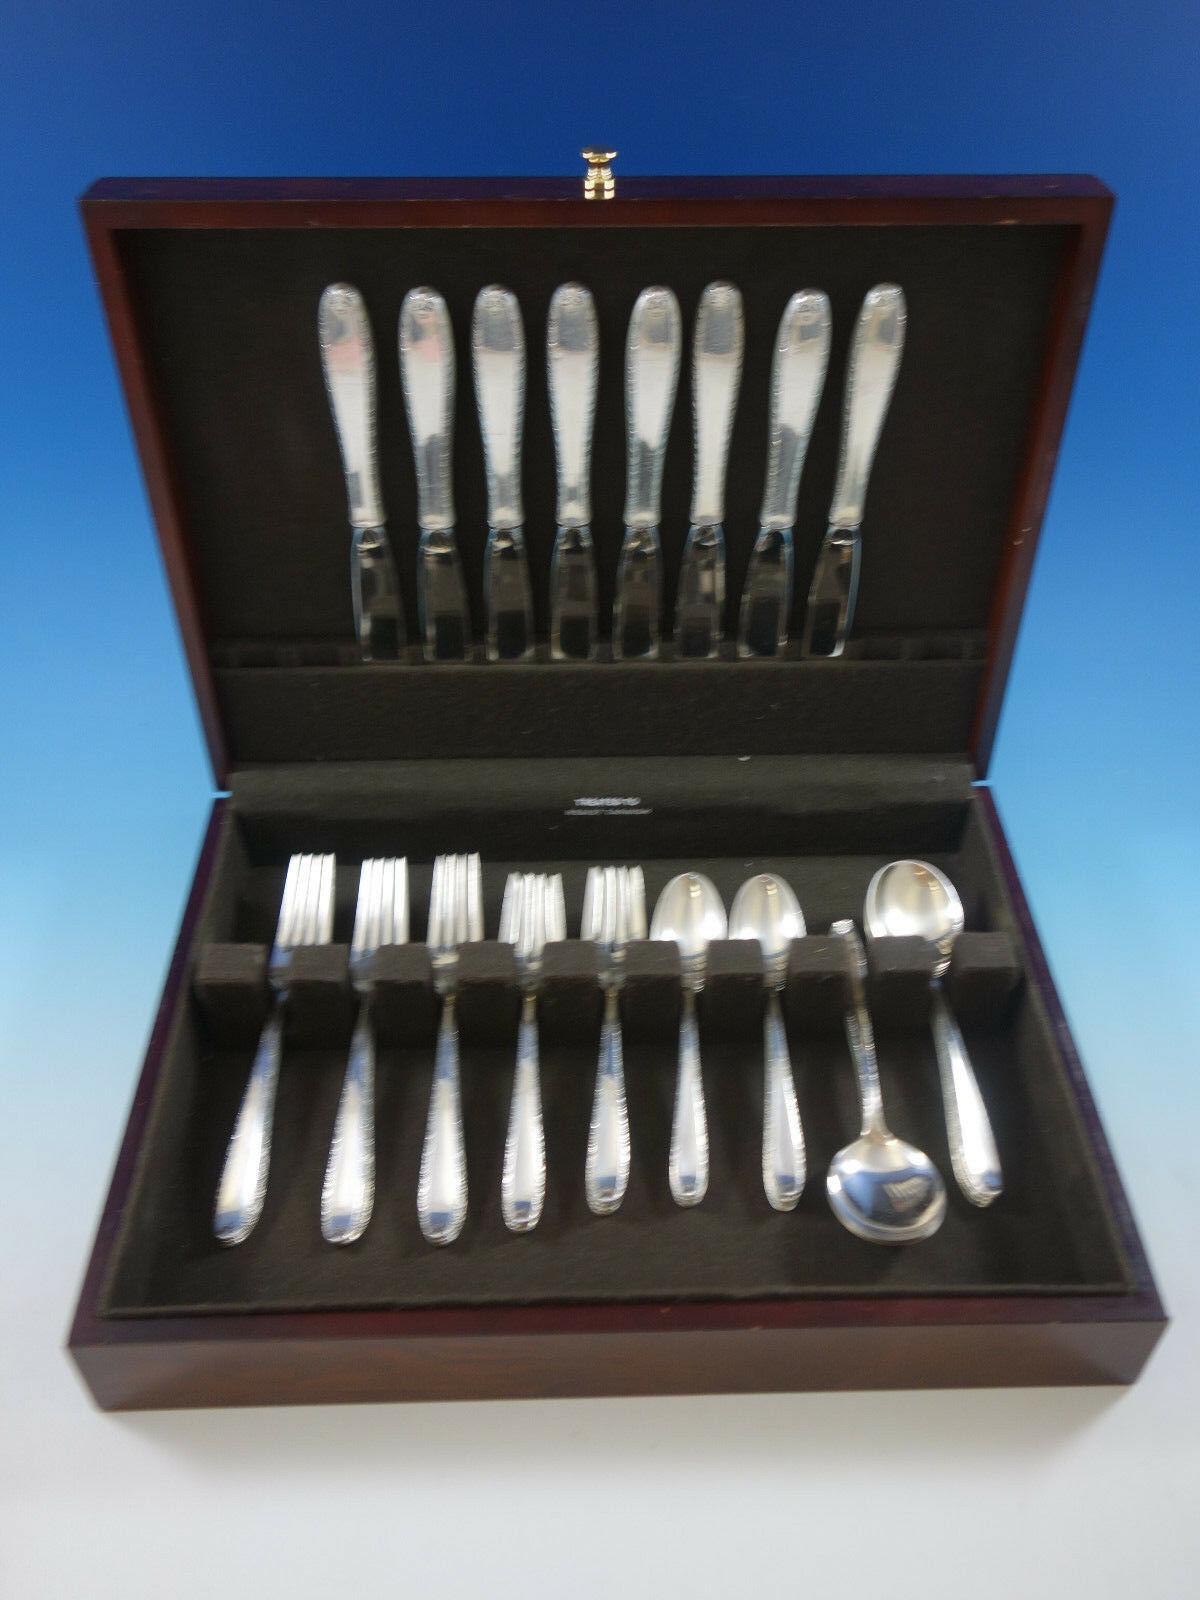 Southern Charm by Alvin sterling silver flatware set, 40 pieces. This set includes:

8 knives, 8 7/8